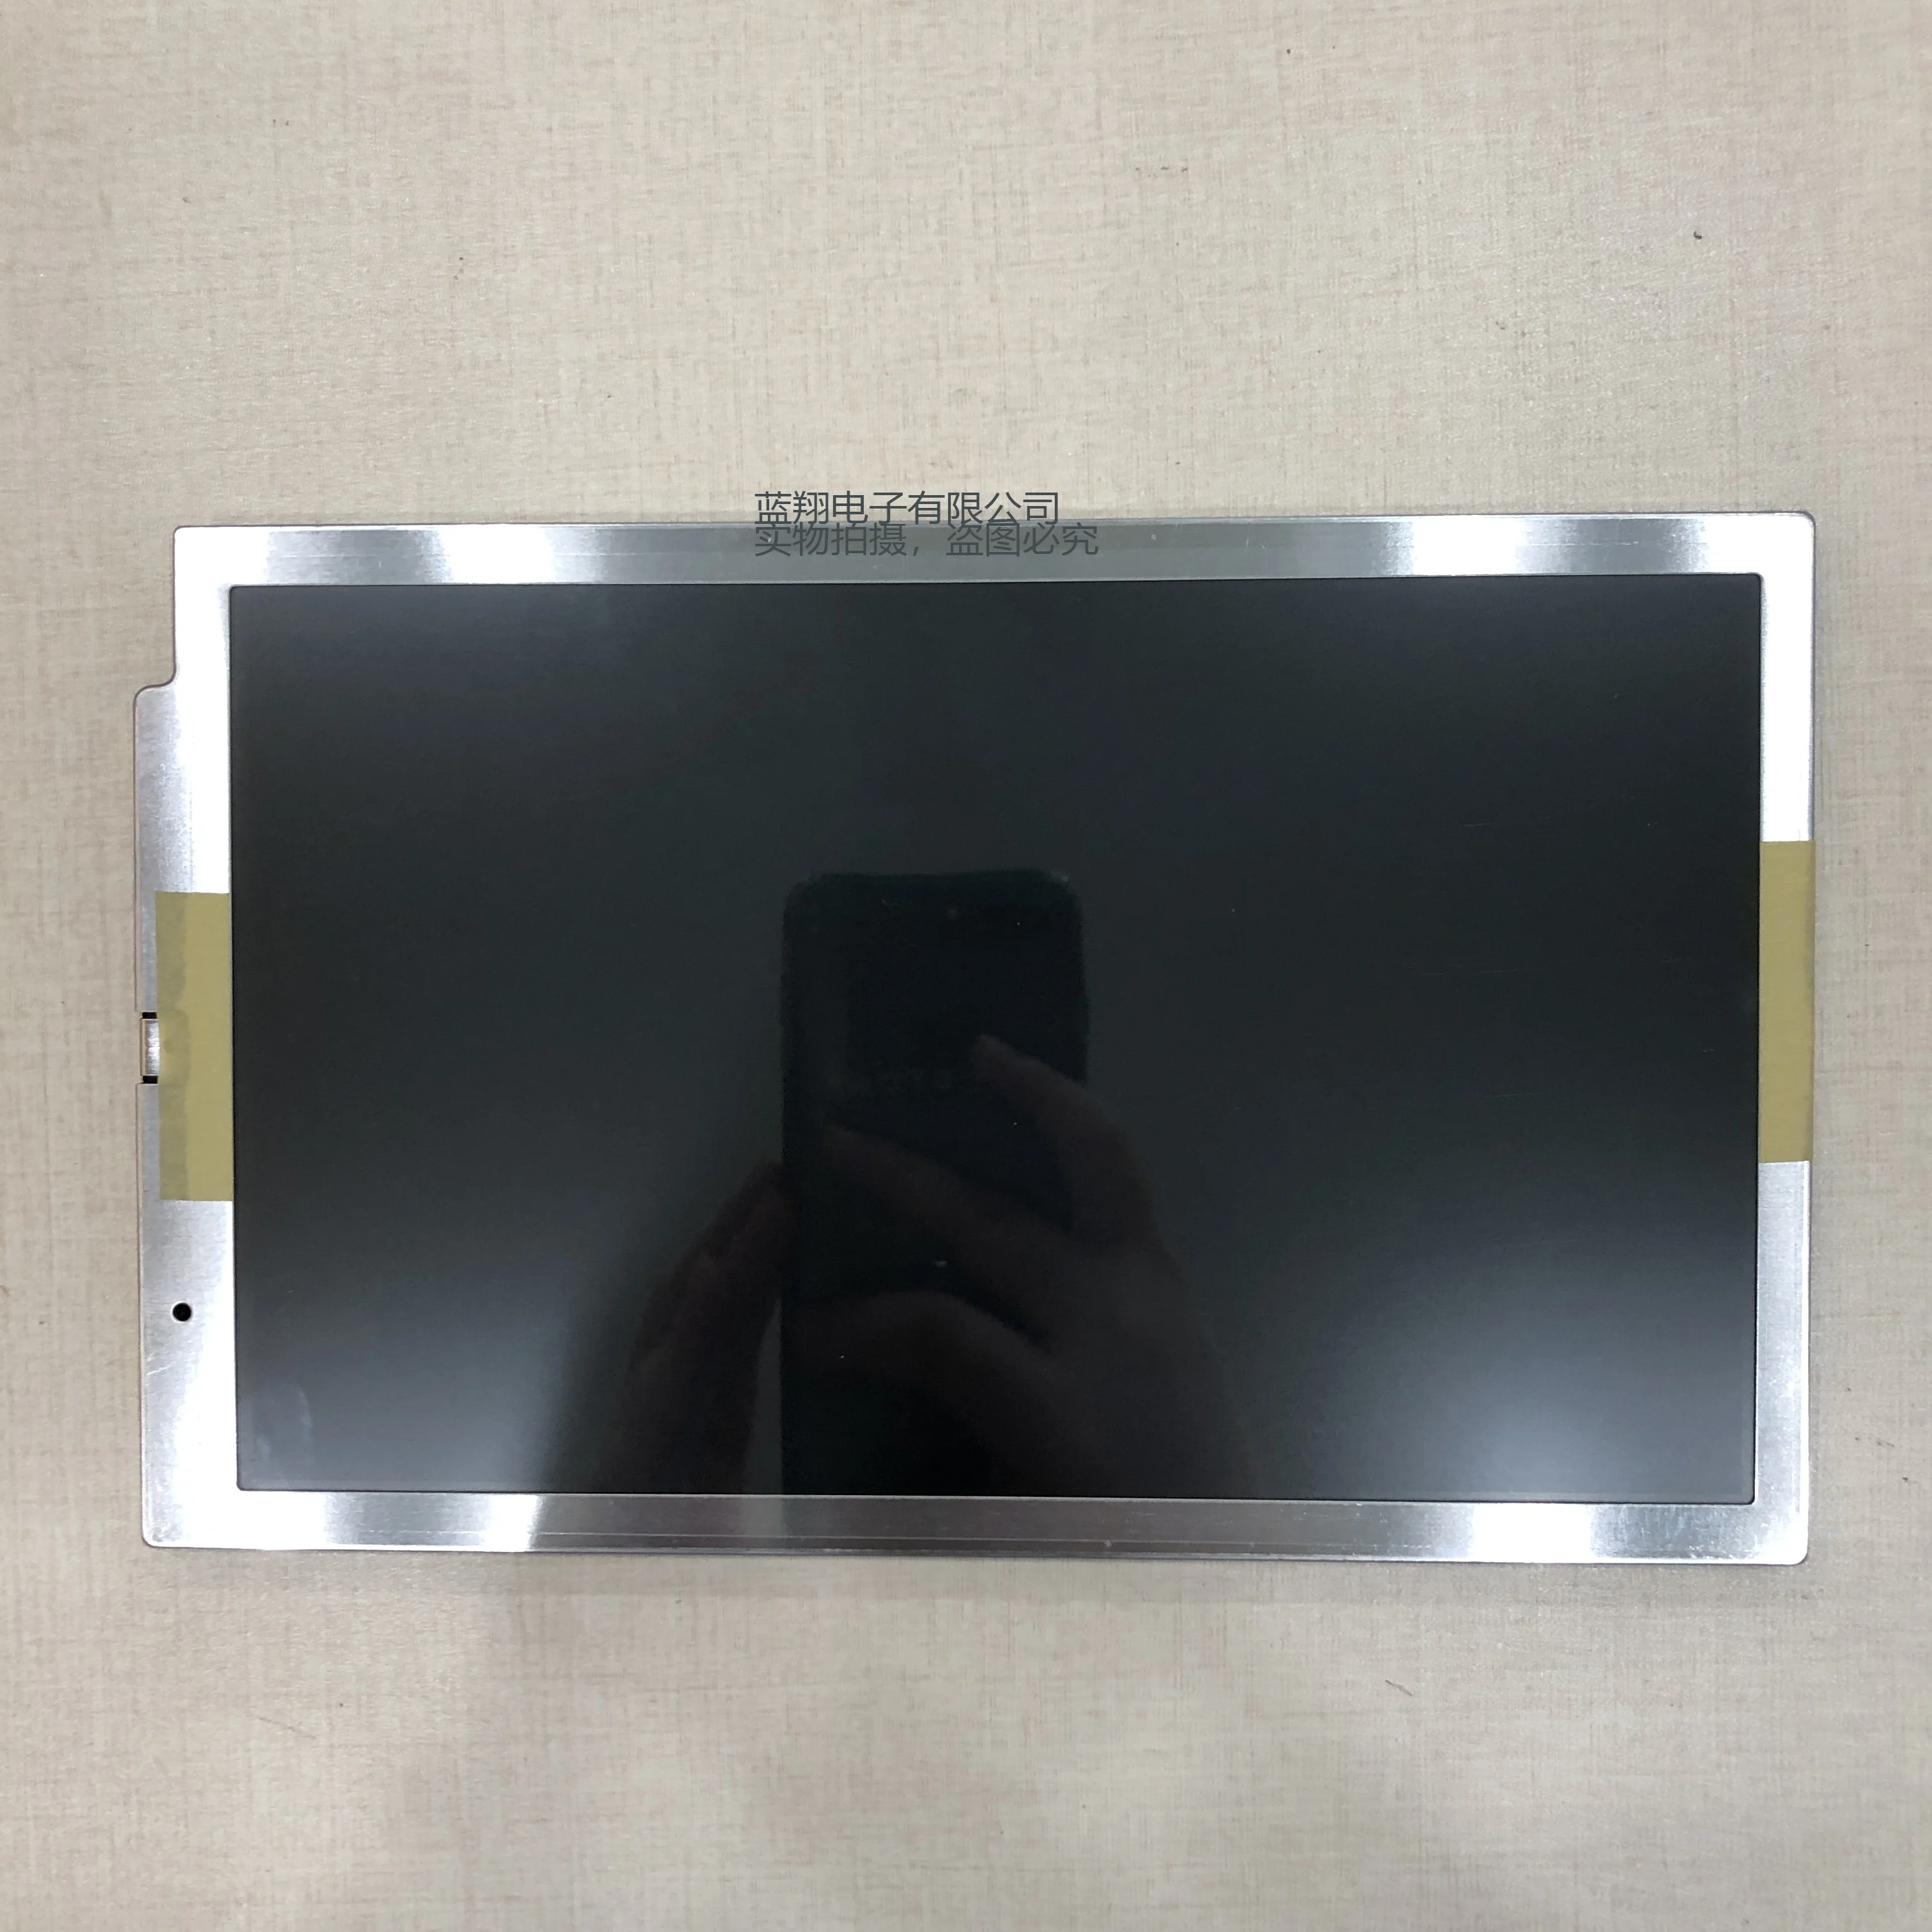 LCD Display for NL8048BC24-09D LCD Display Panel Brand New & Original 1pcs original lcd display touch panel replacement for lg spirit h440 c70